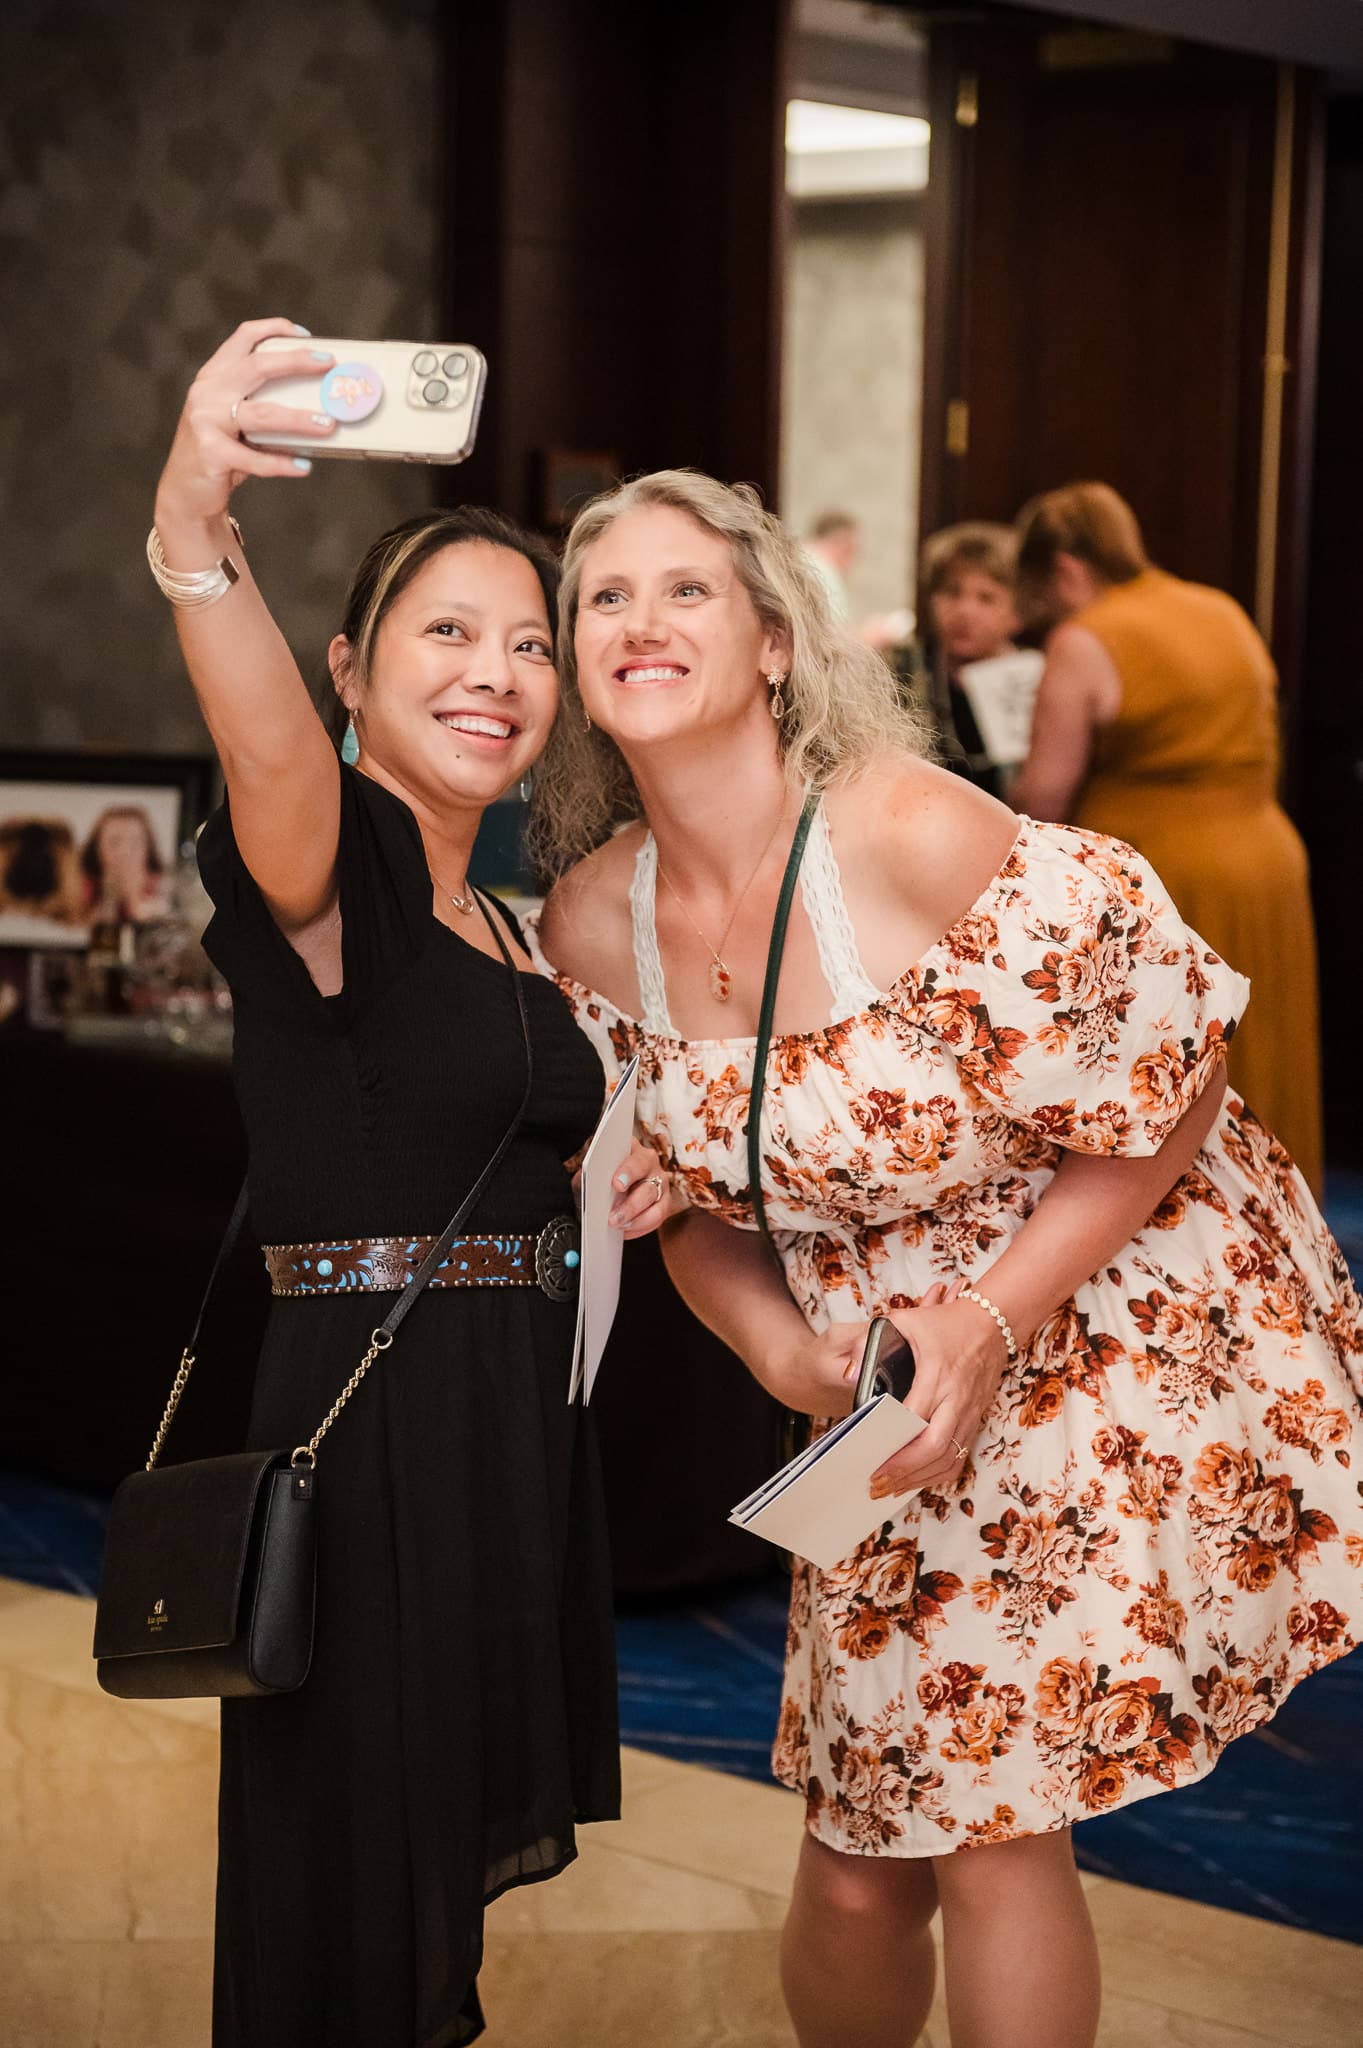 Two women take a selfie together at a charity event in downtown Denver.